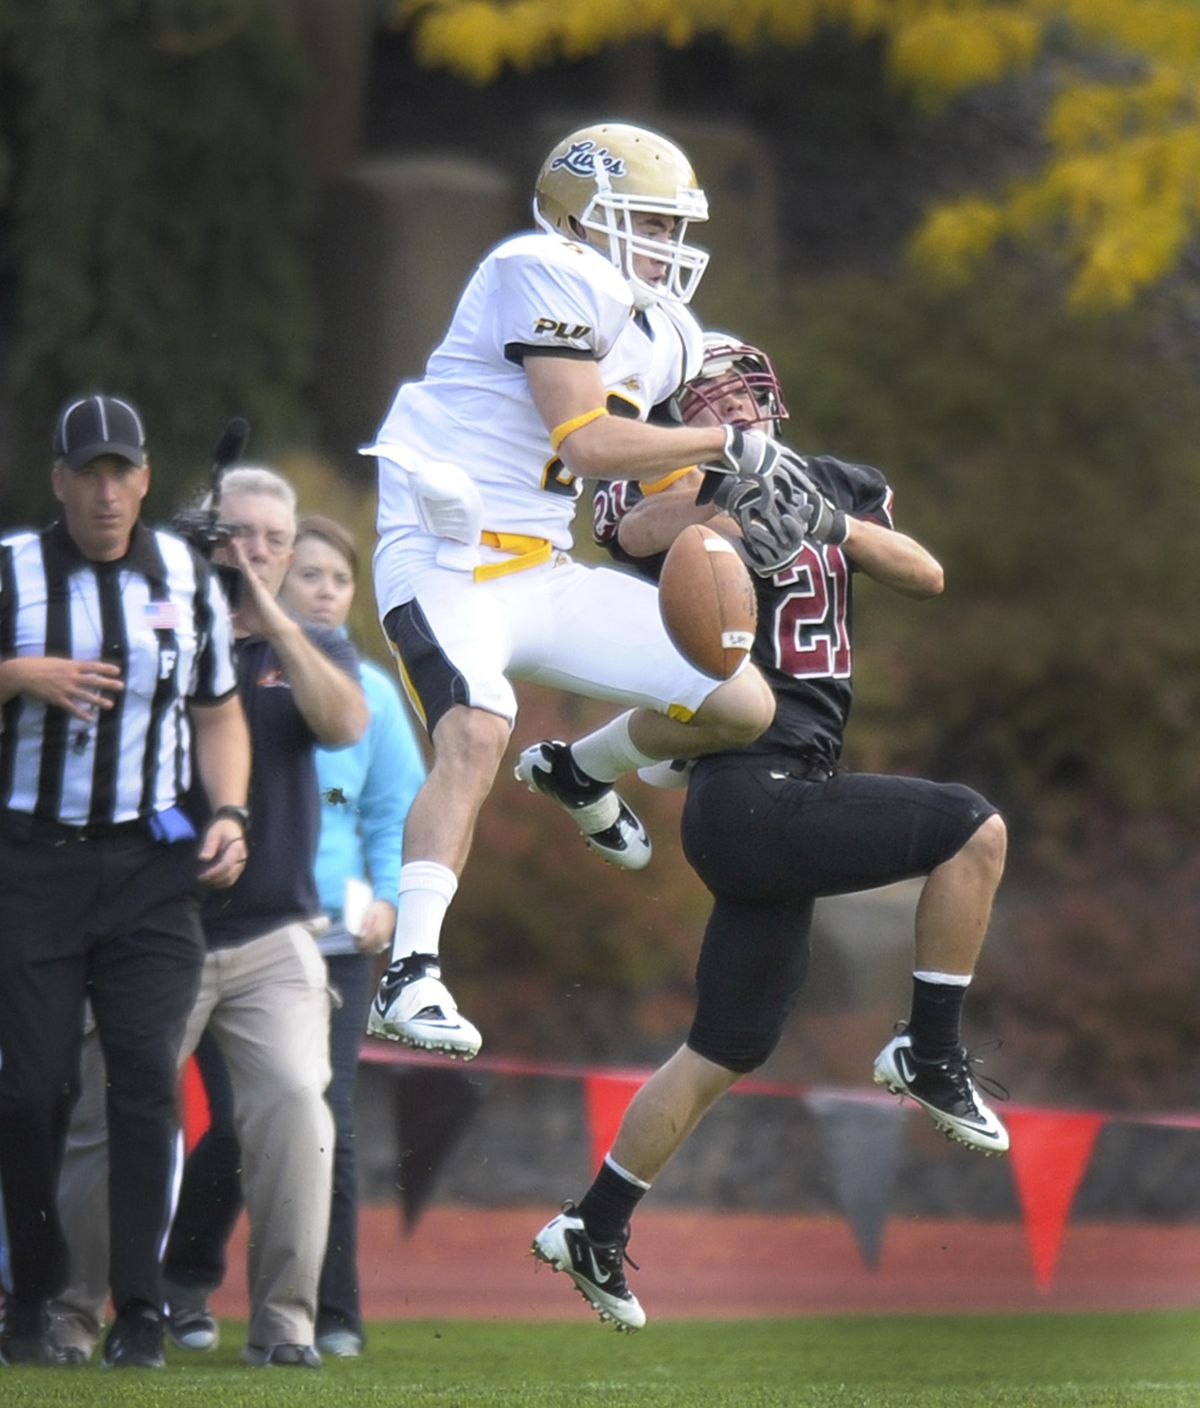 Whitworth University defensive back Paul Miller (21)  knocks away a first half PLU pass intended for Alex McDiarmid during the first half of their game at the Pine Bowl on the Whitworth campus, Saturday, Oct.  8, 2011. (Christopher Anderson / Spokesman-Review)